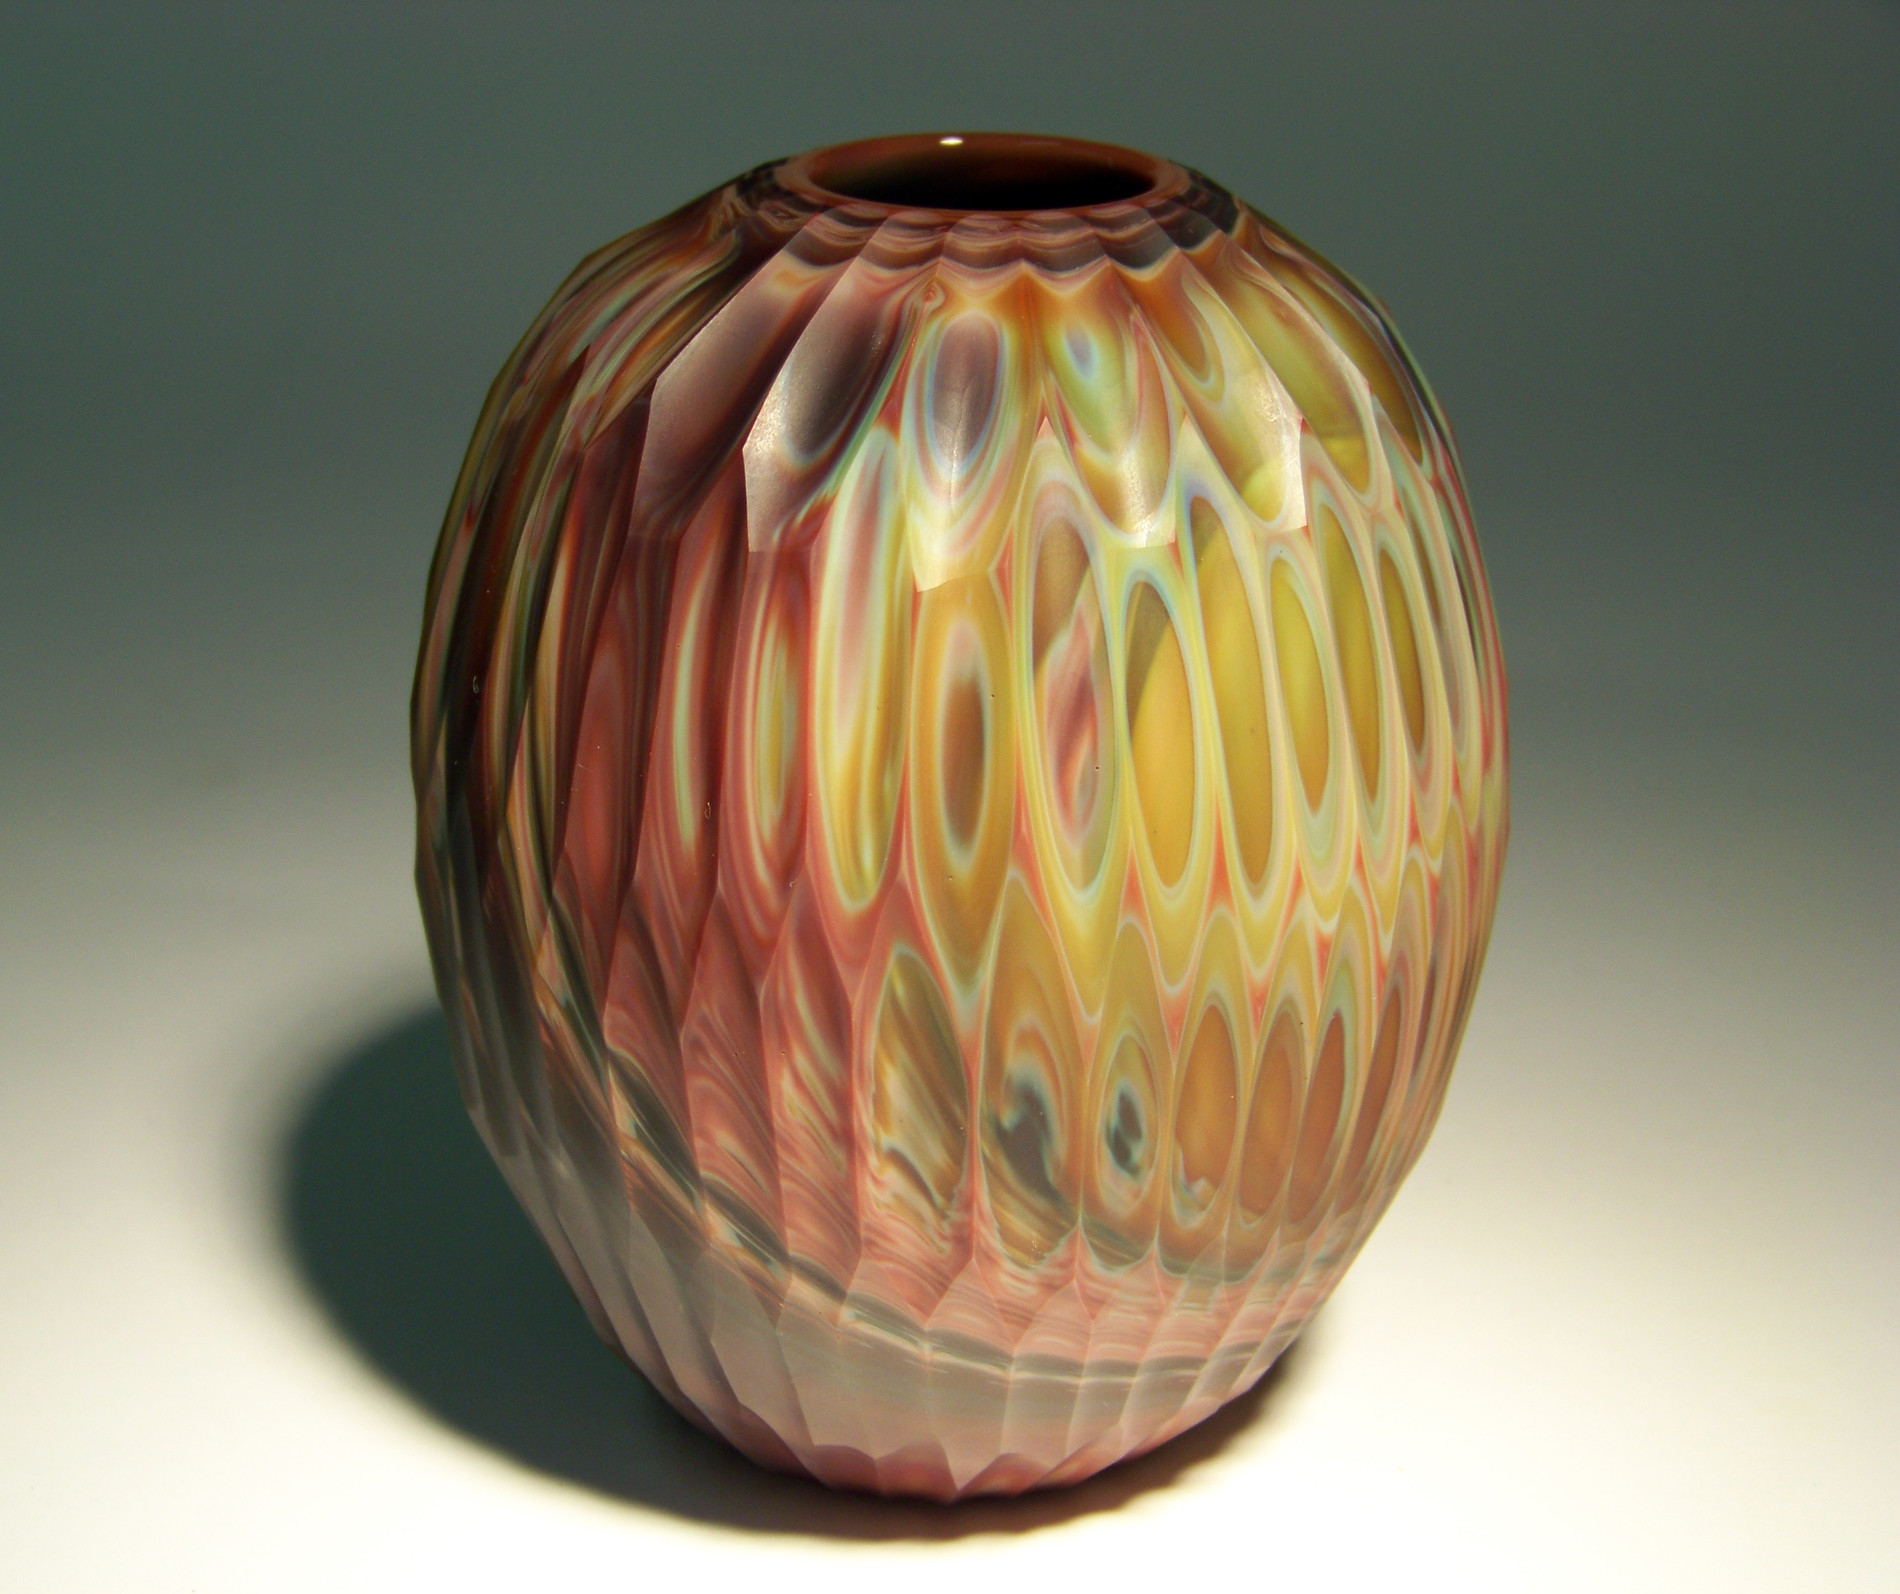 20 Great Josh Simpson Vase 2024 free download josh simpson vase of josh simpson philadelphia museum of art craft show for my glass includes imaginary planets vessels and sculptural work each piece is connected to the last one either by 